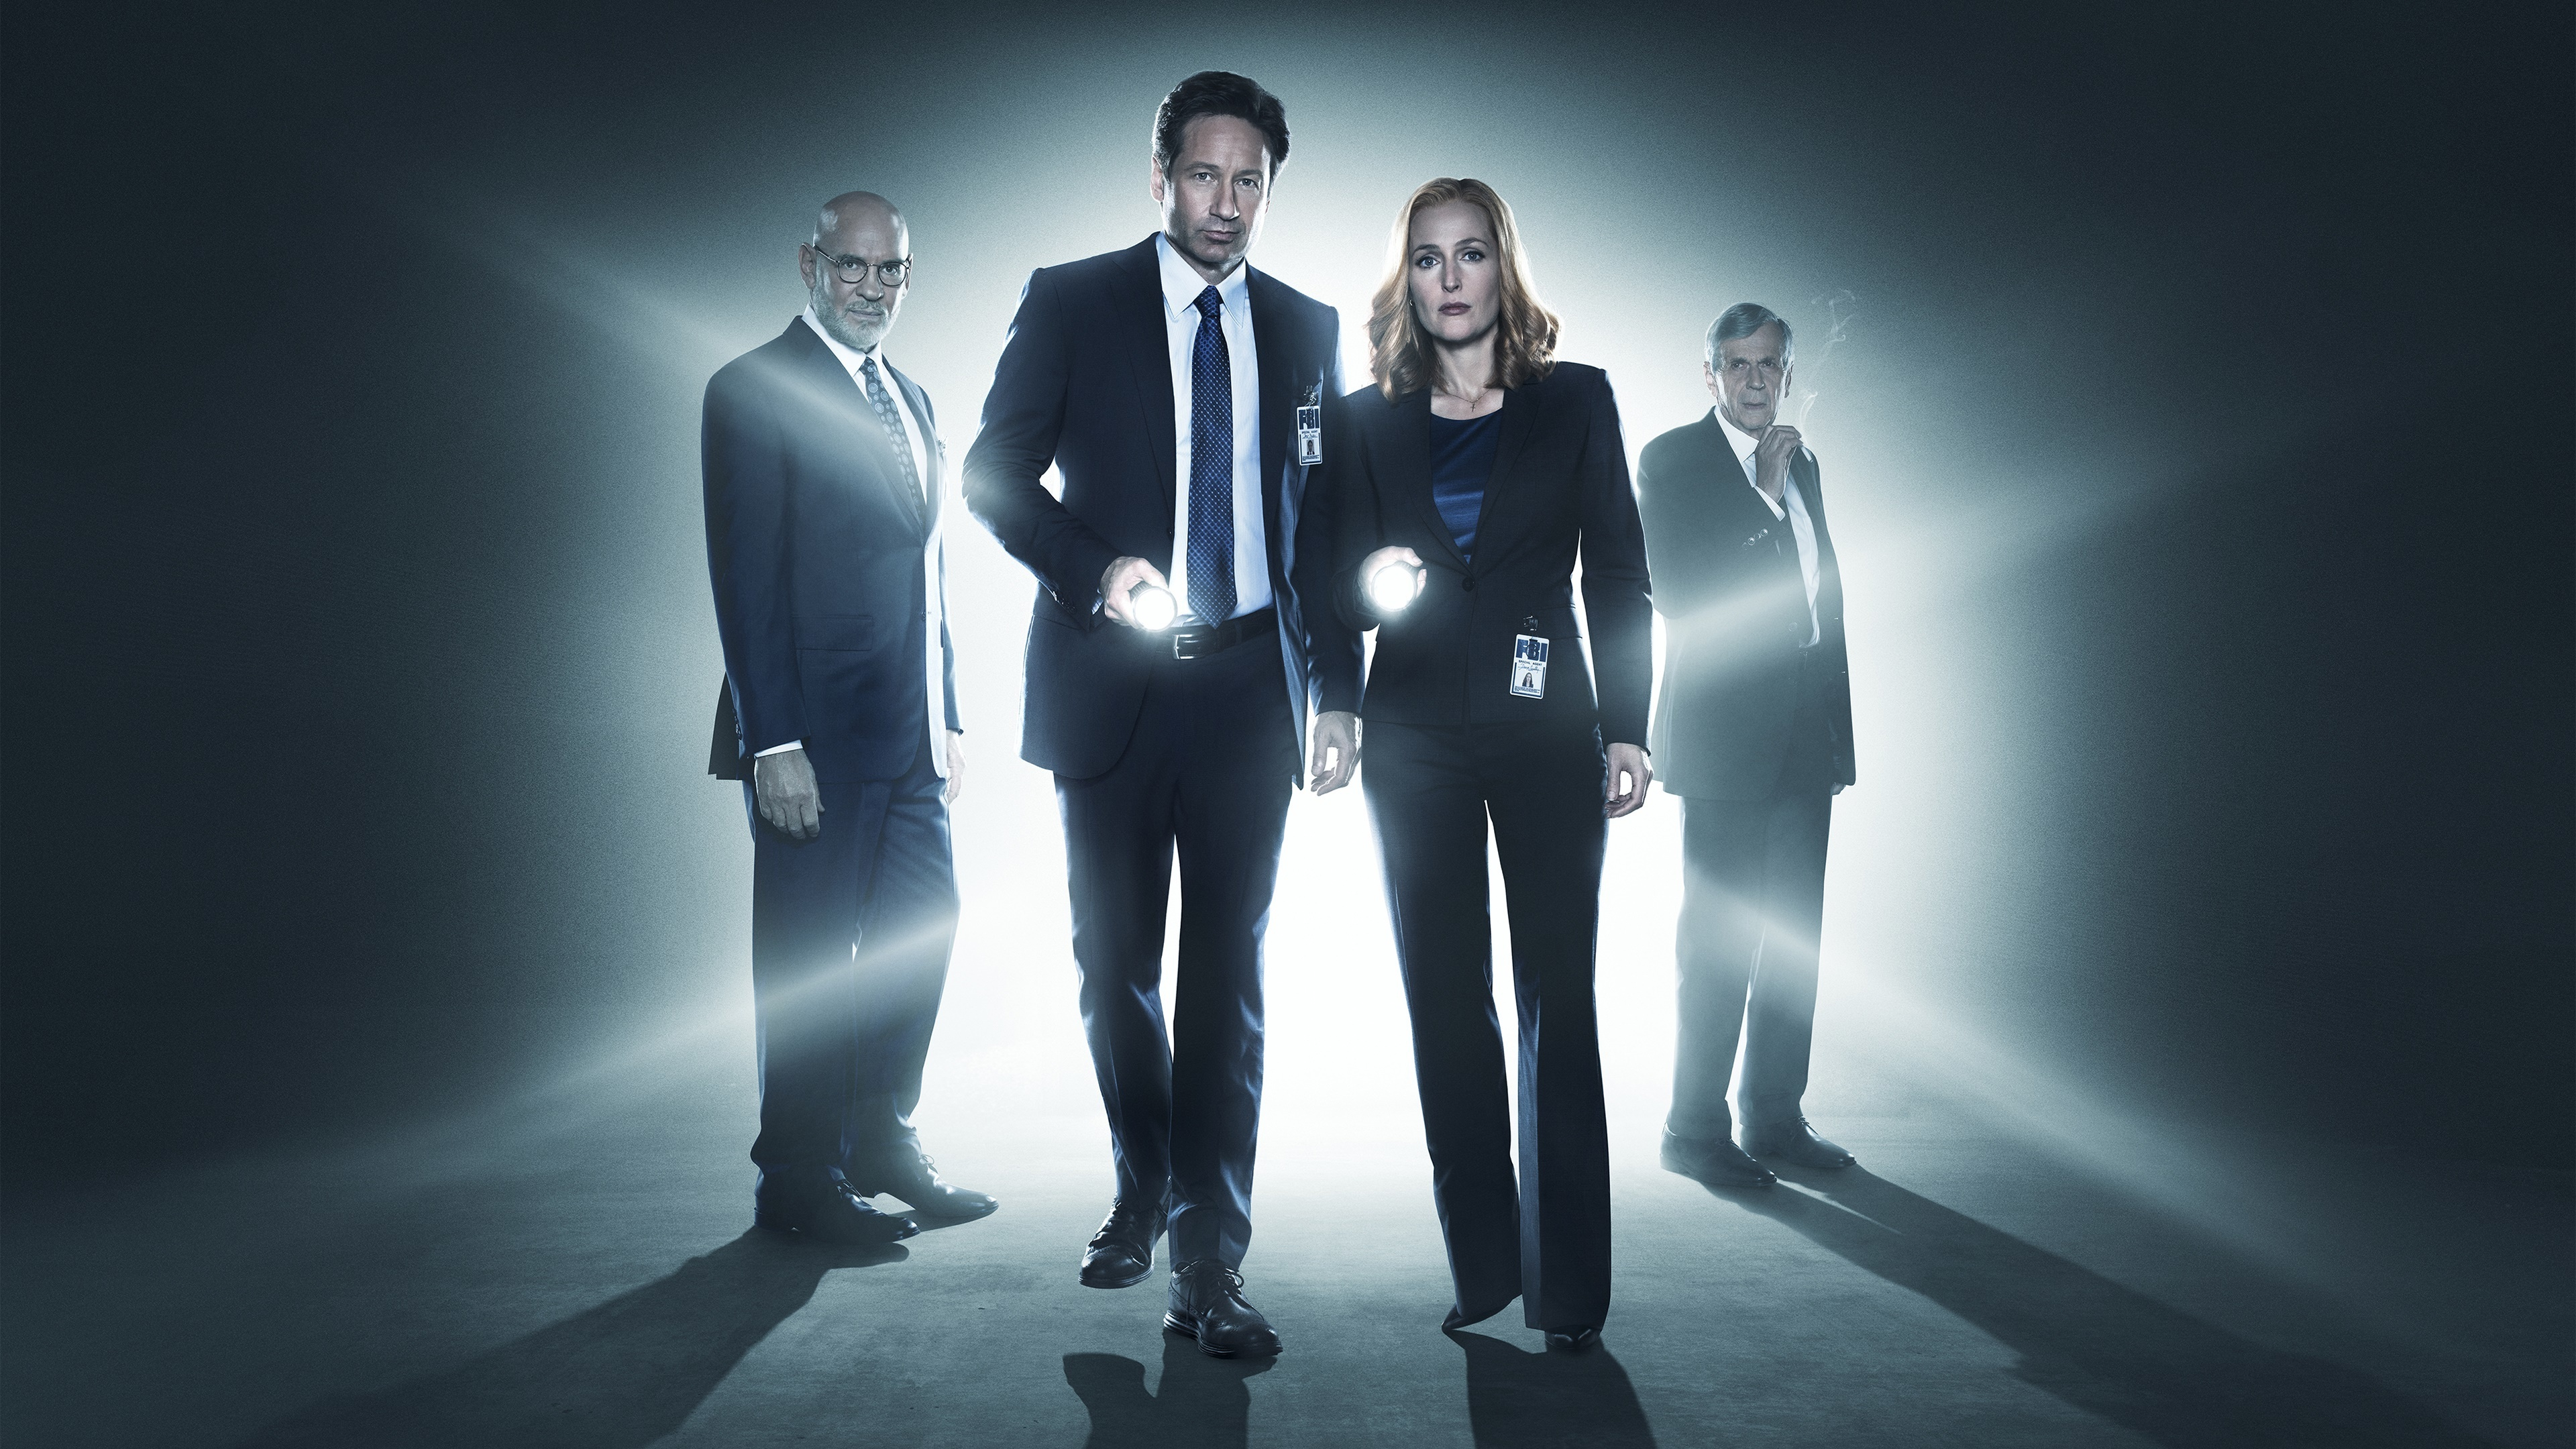 3840x2160 140+ The X-Files HD Wallpapers and Backgrounds